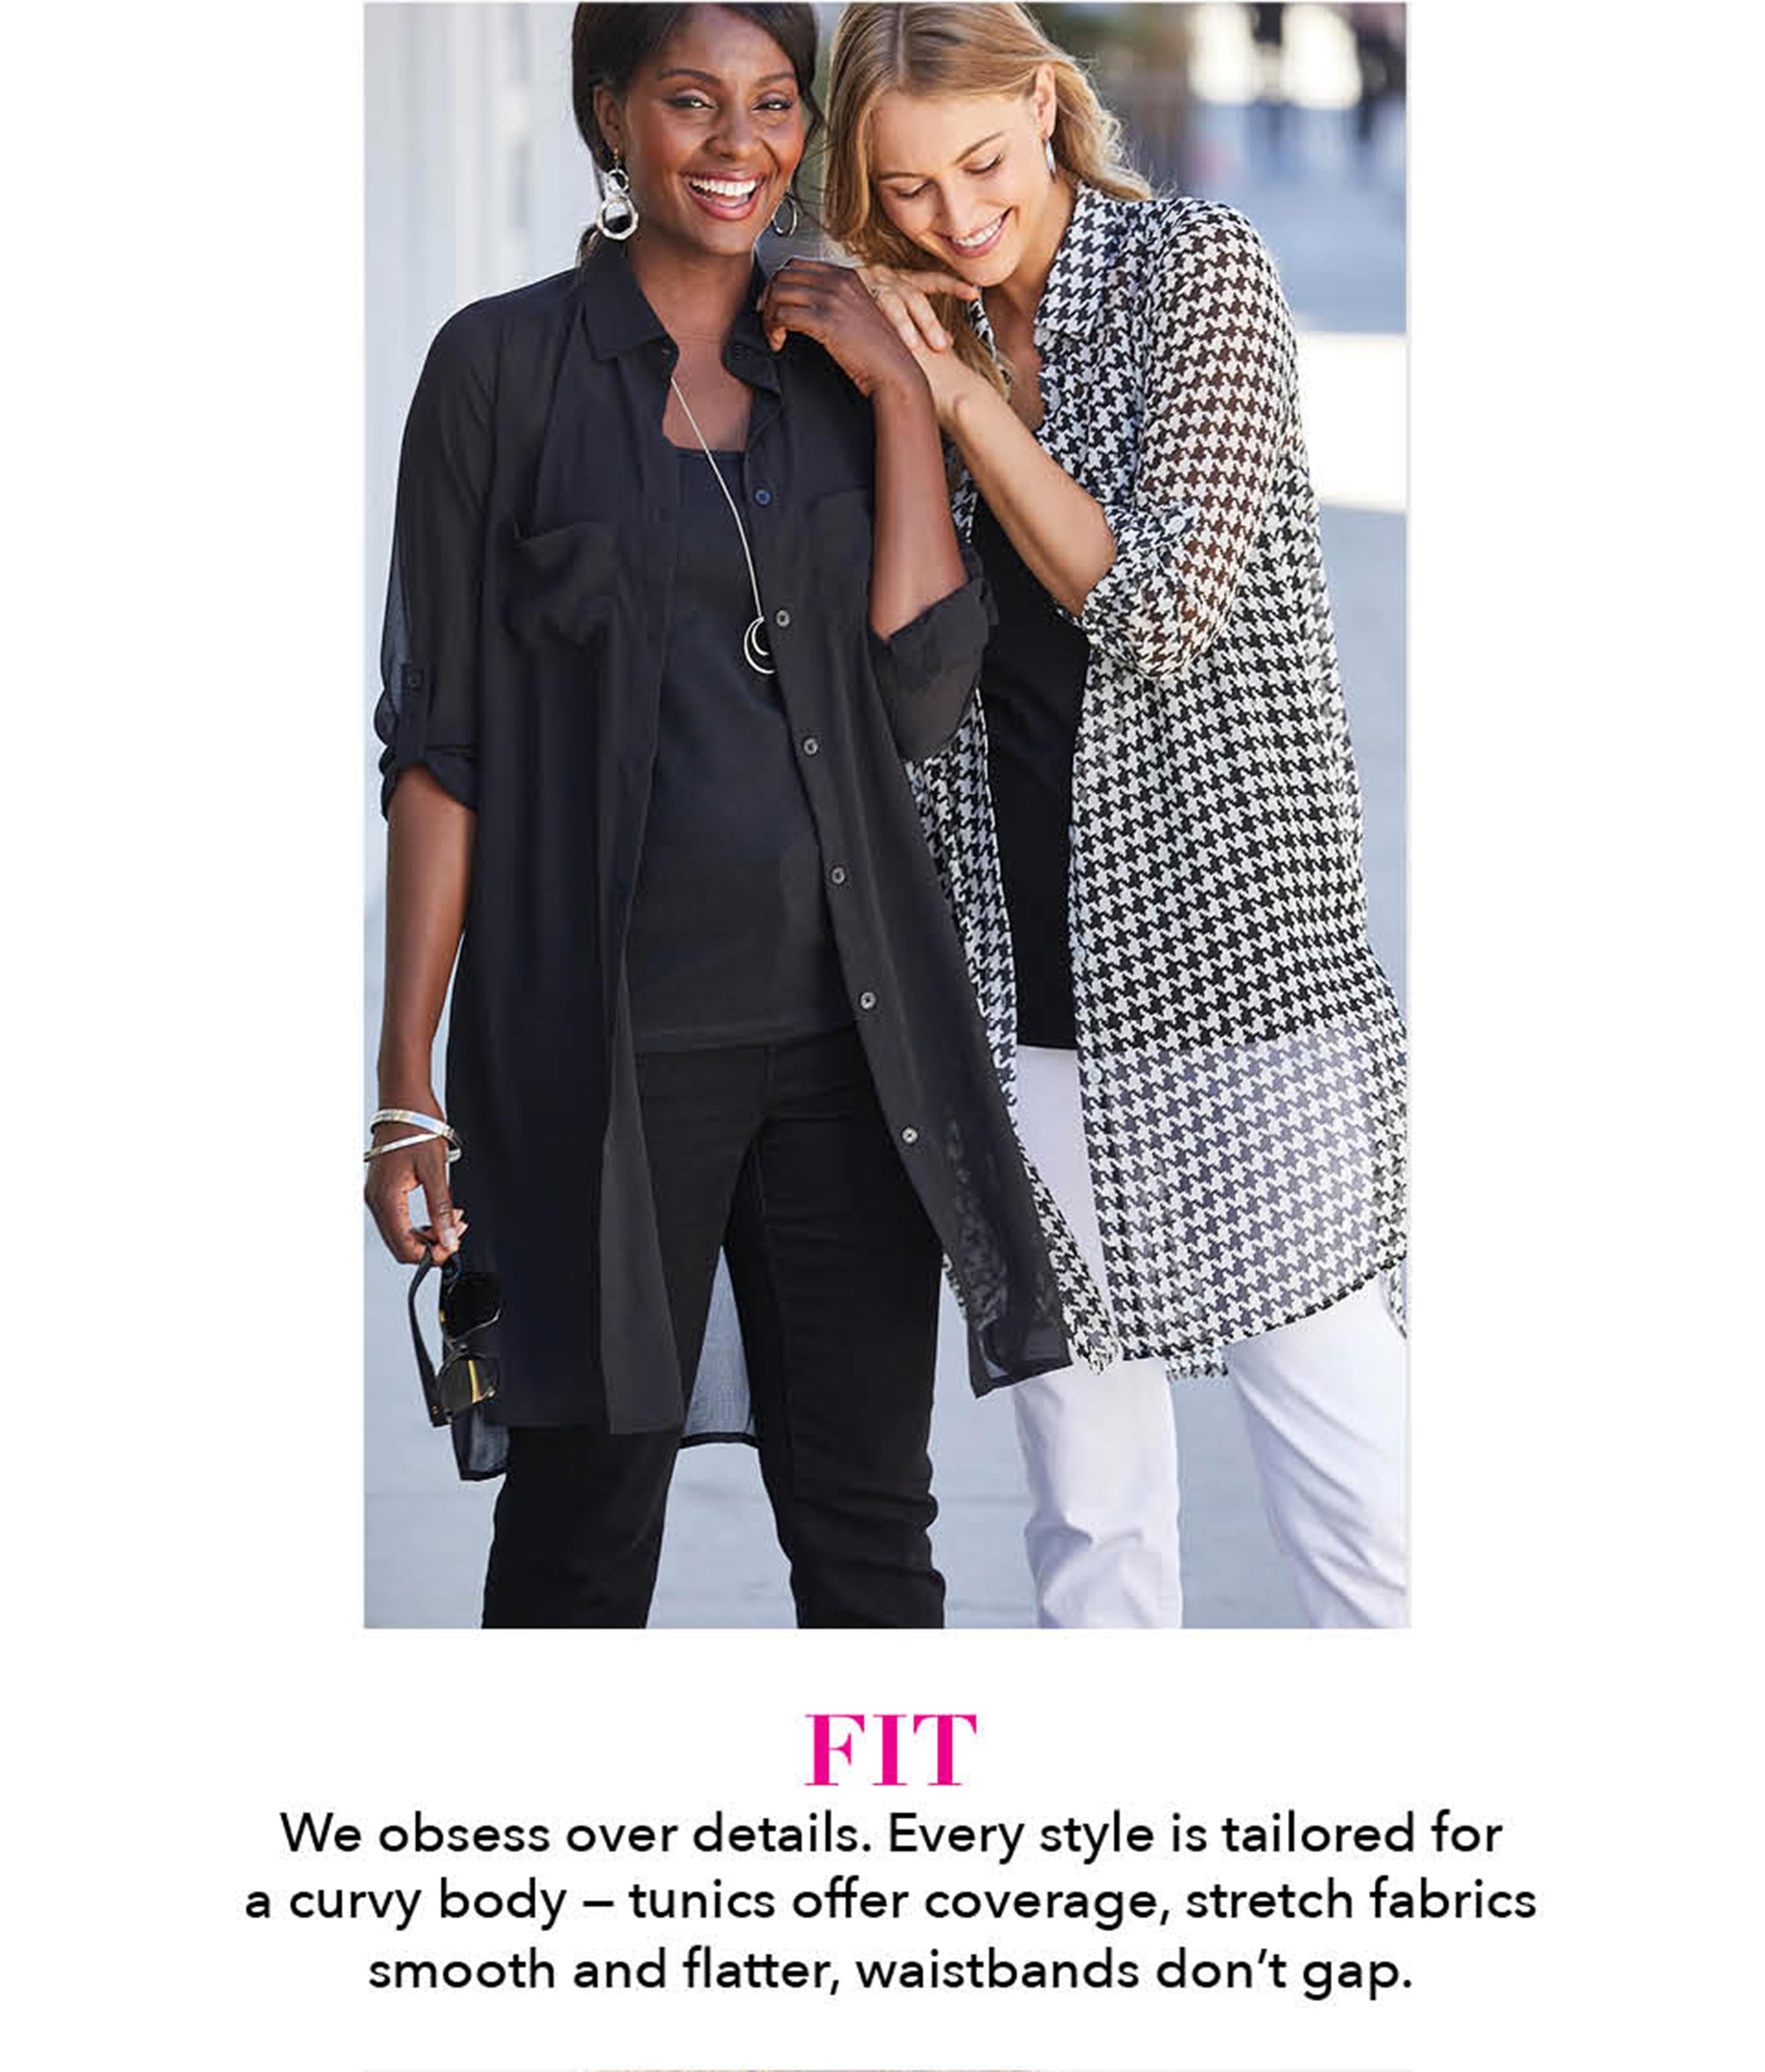 Fit - we obsess over details. every style is tailored for curvy body - tunics offer coverage, strech fabrics smooth and flatter, waistbands dont gap.